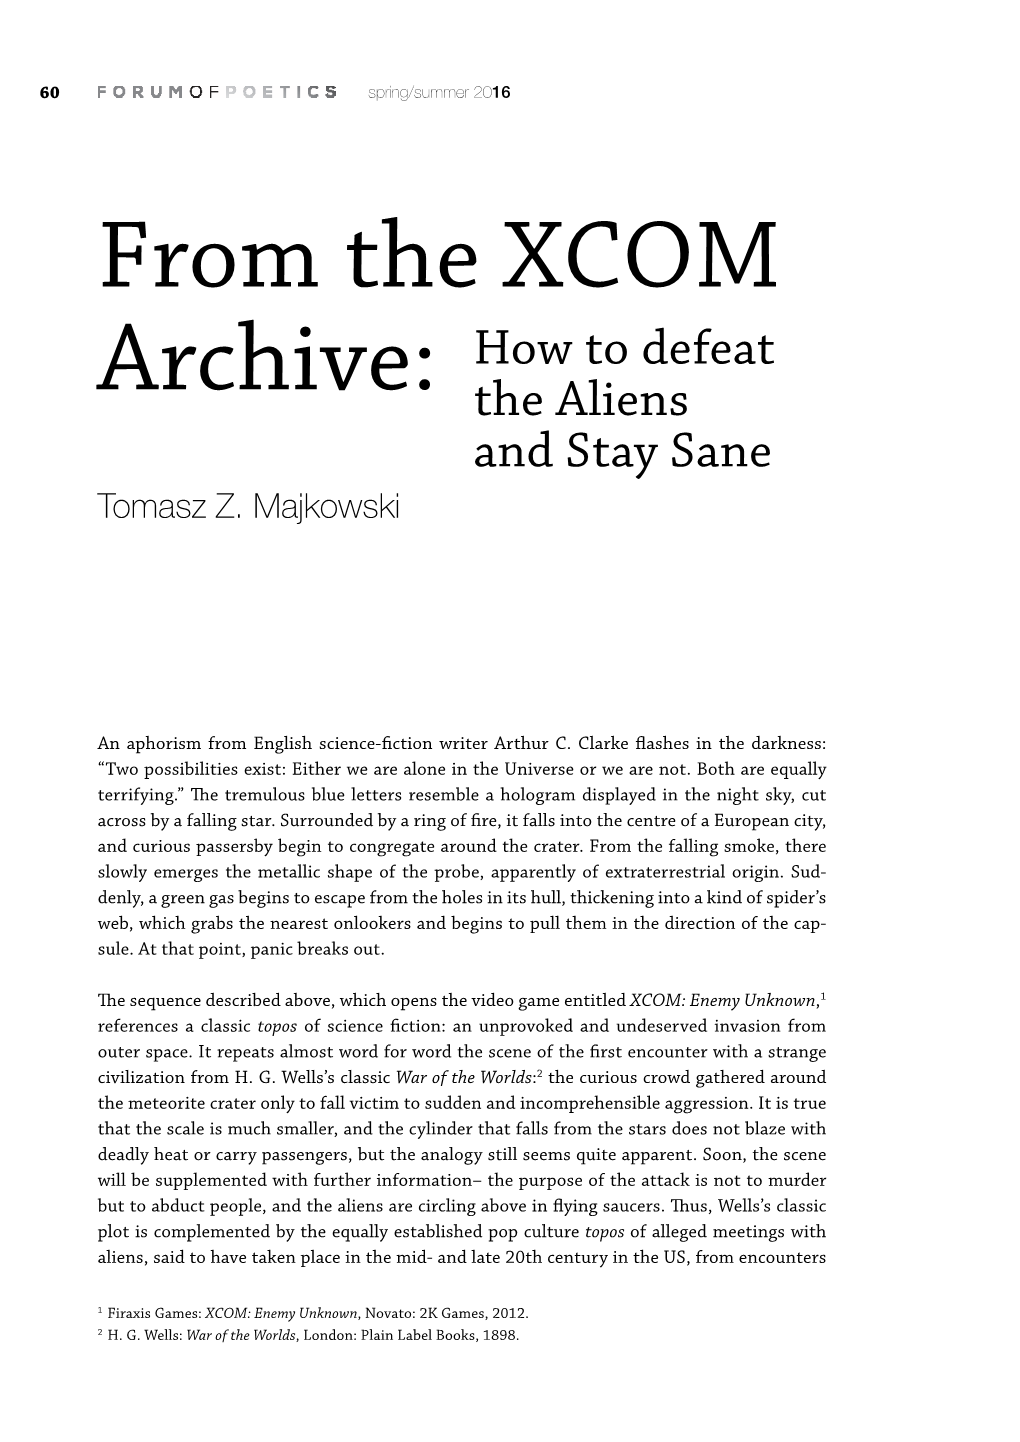 From the XCOM Archive